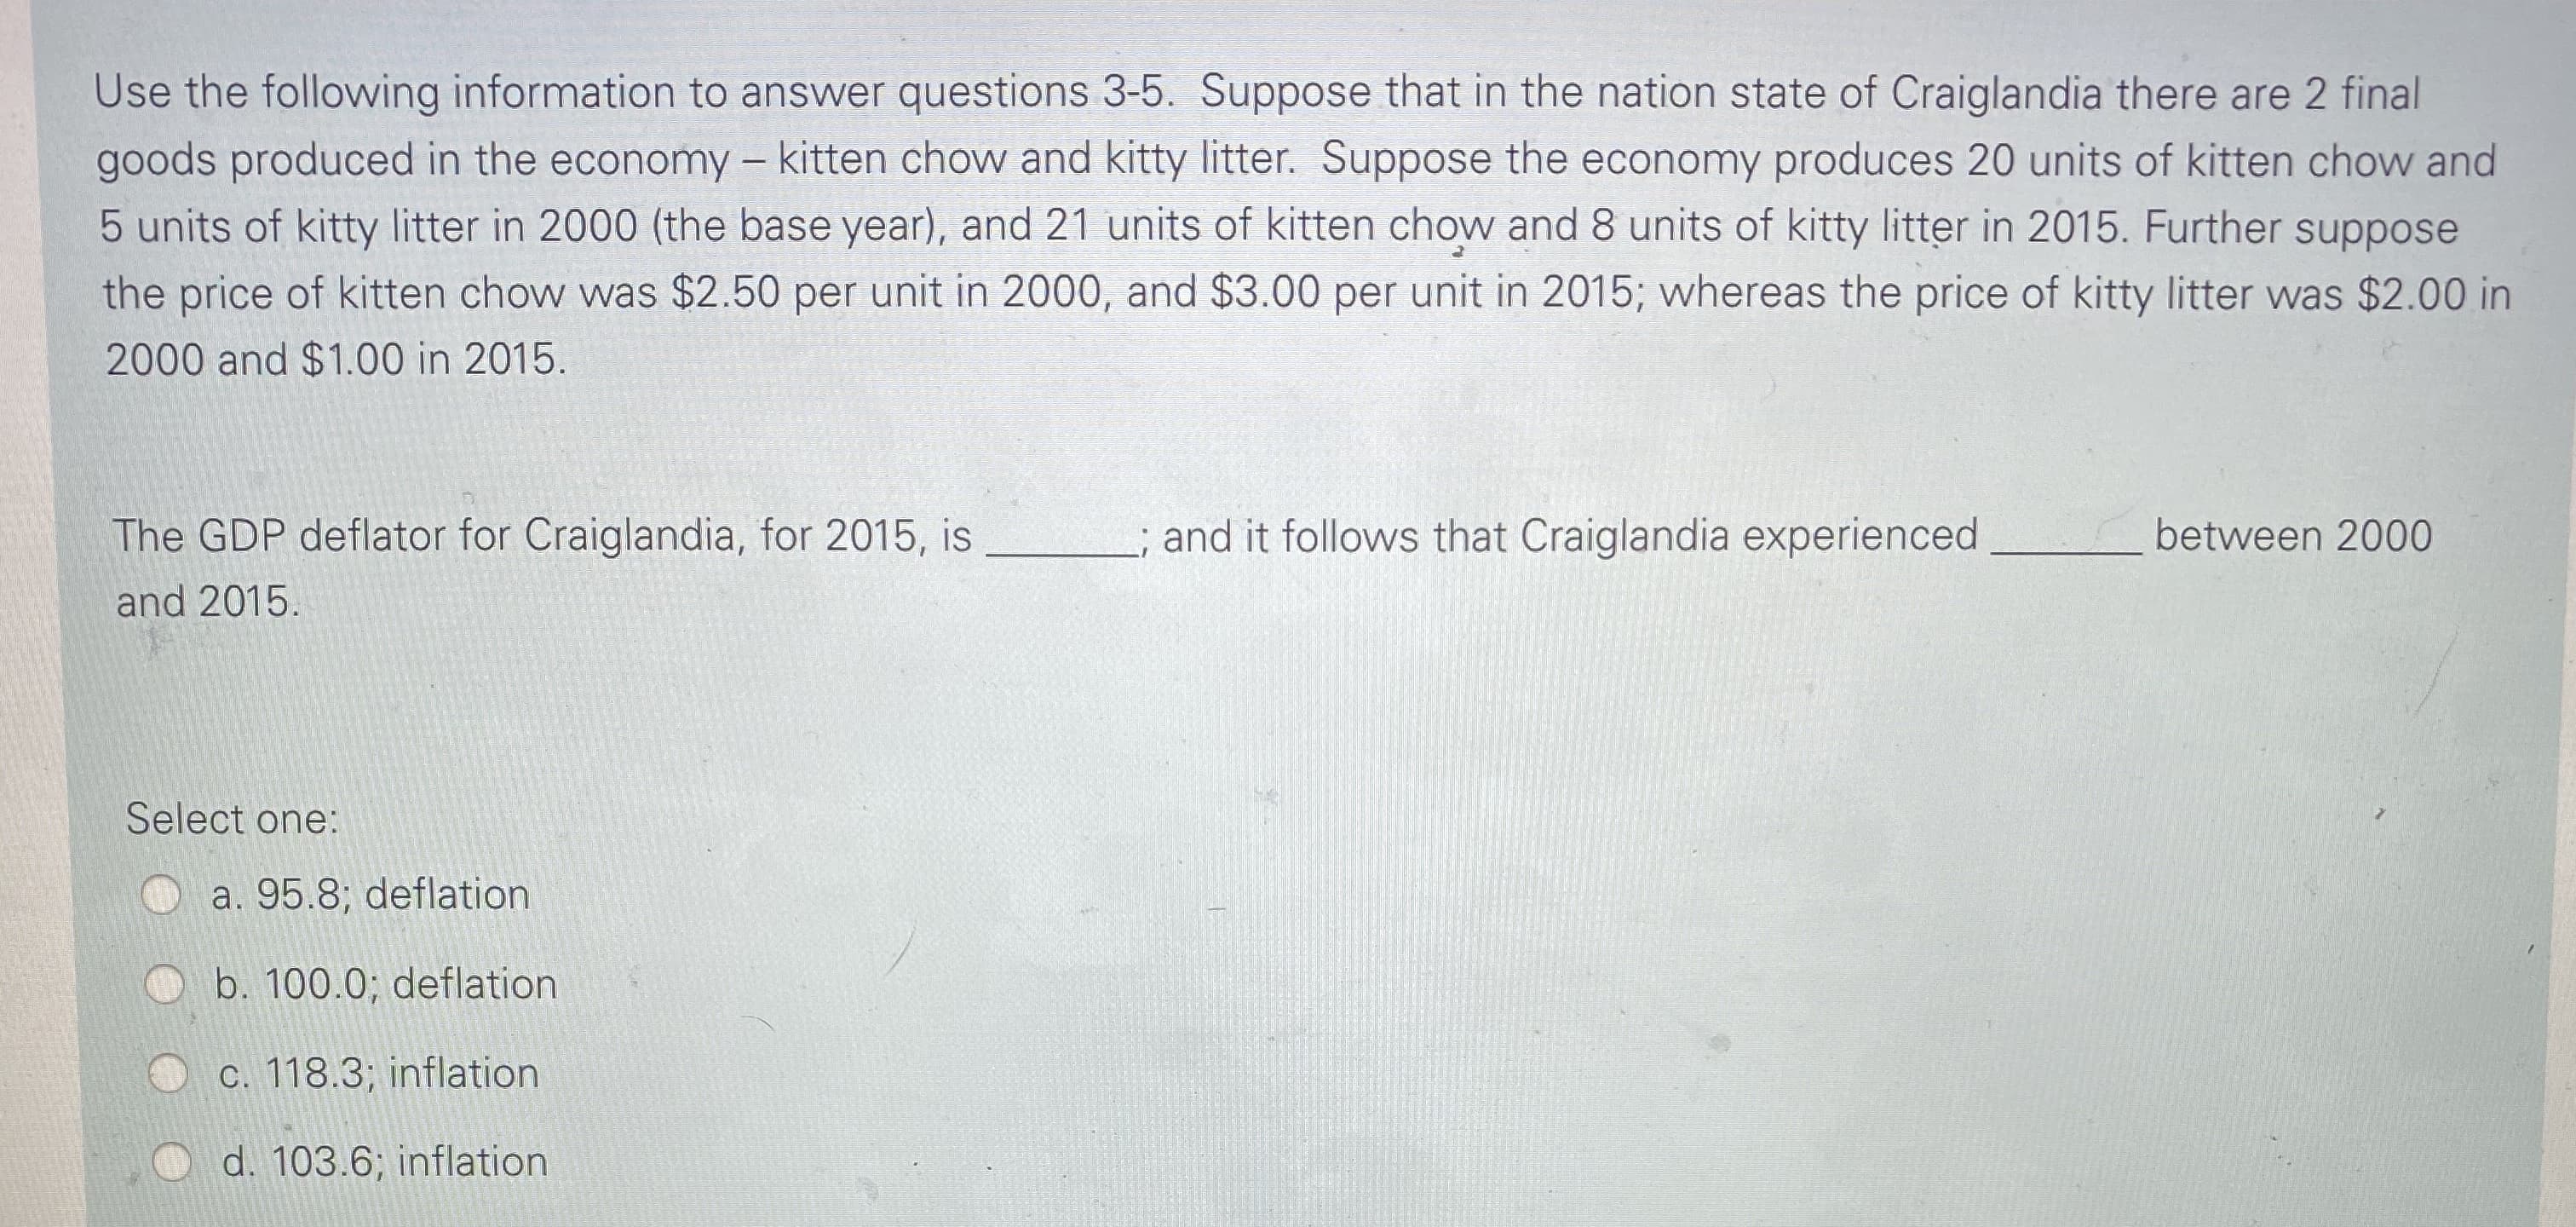 Use the following information to answer questions 3-5. Suppose that in the nation state of Craiglandia there are 2 final
goods produced in the economy - kitten chow and kitty litter. Suppose the economy produces 20 units of kitten chow and
5 units of kitty litter in 2000 (the base year), and 21 units of kitten chow and 8 units of kitty litter in 2015. Further suppose
the price of kitten chow was $2.50 per unit in 2000, and $3.00 per unit in 2015; whereas the price of kitty litter was $2.00 in
2000 and $1.00 in 2015.
The GDP deflator for Craiglandia, for 2015, is
and it follows that Craiglandia experienced
between 2000
and 2015.
